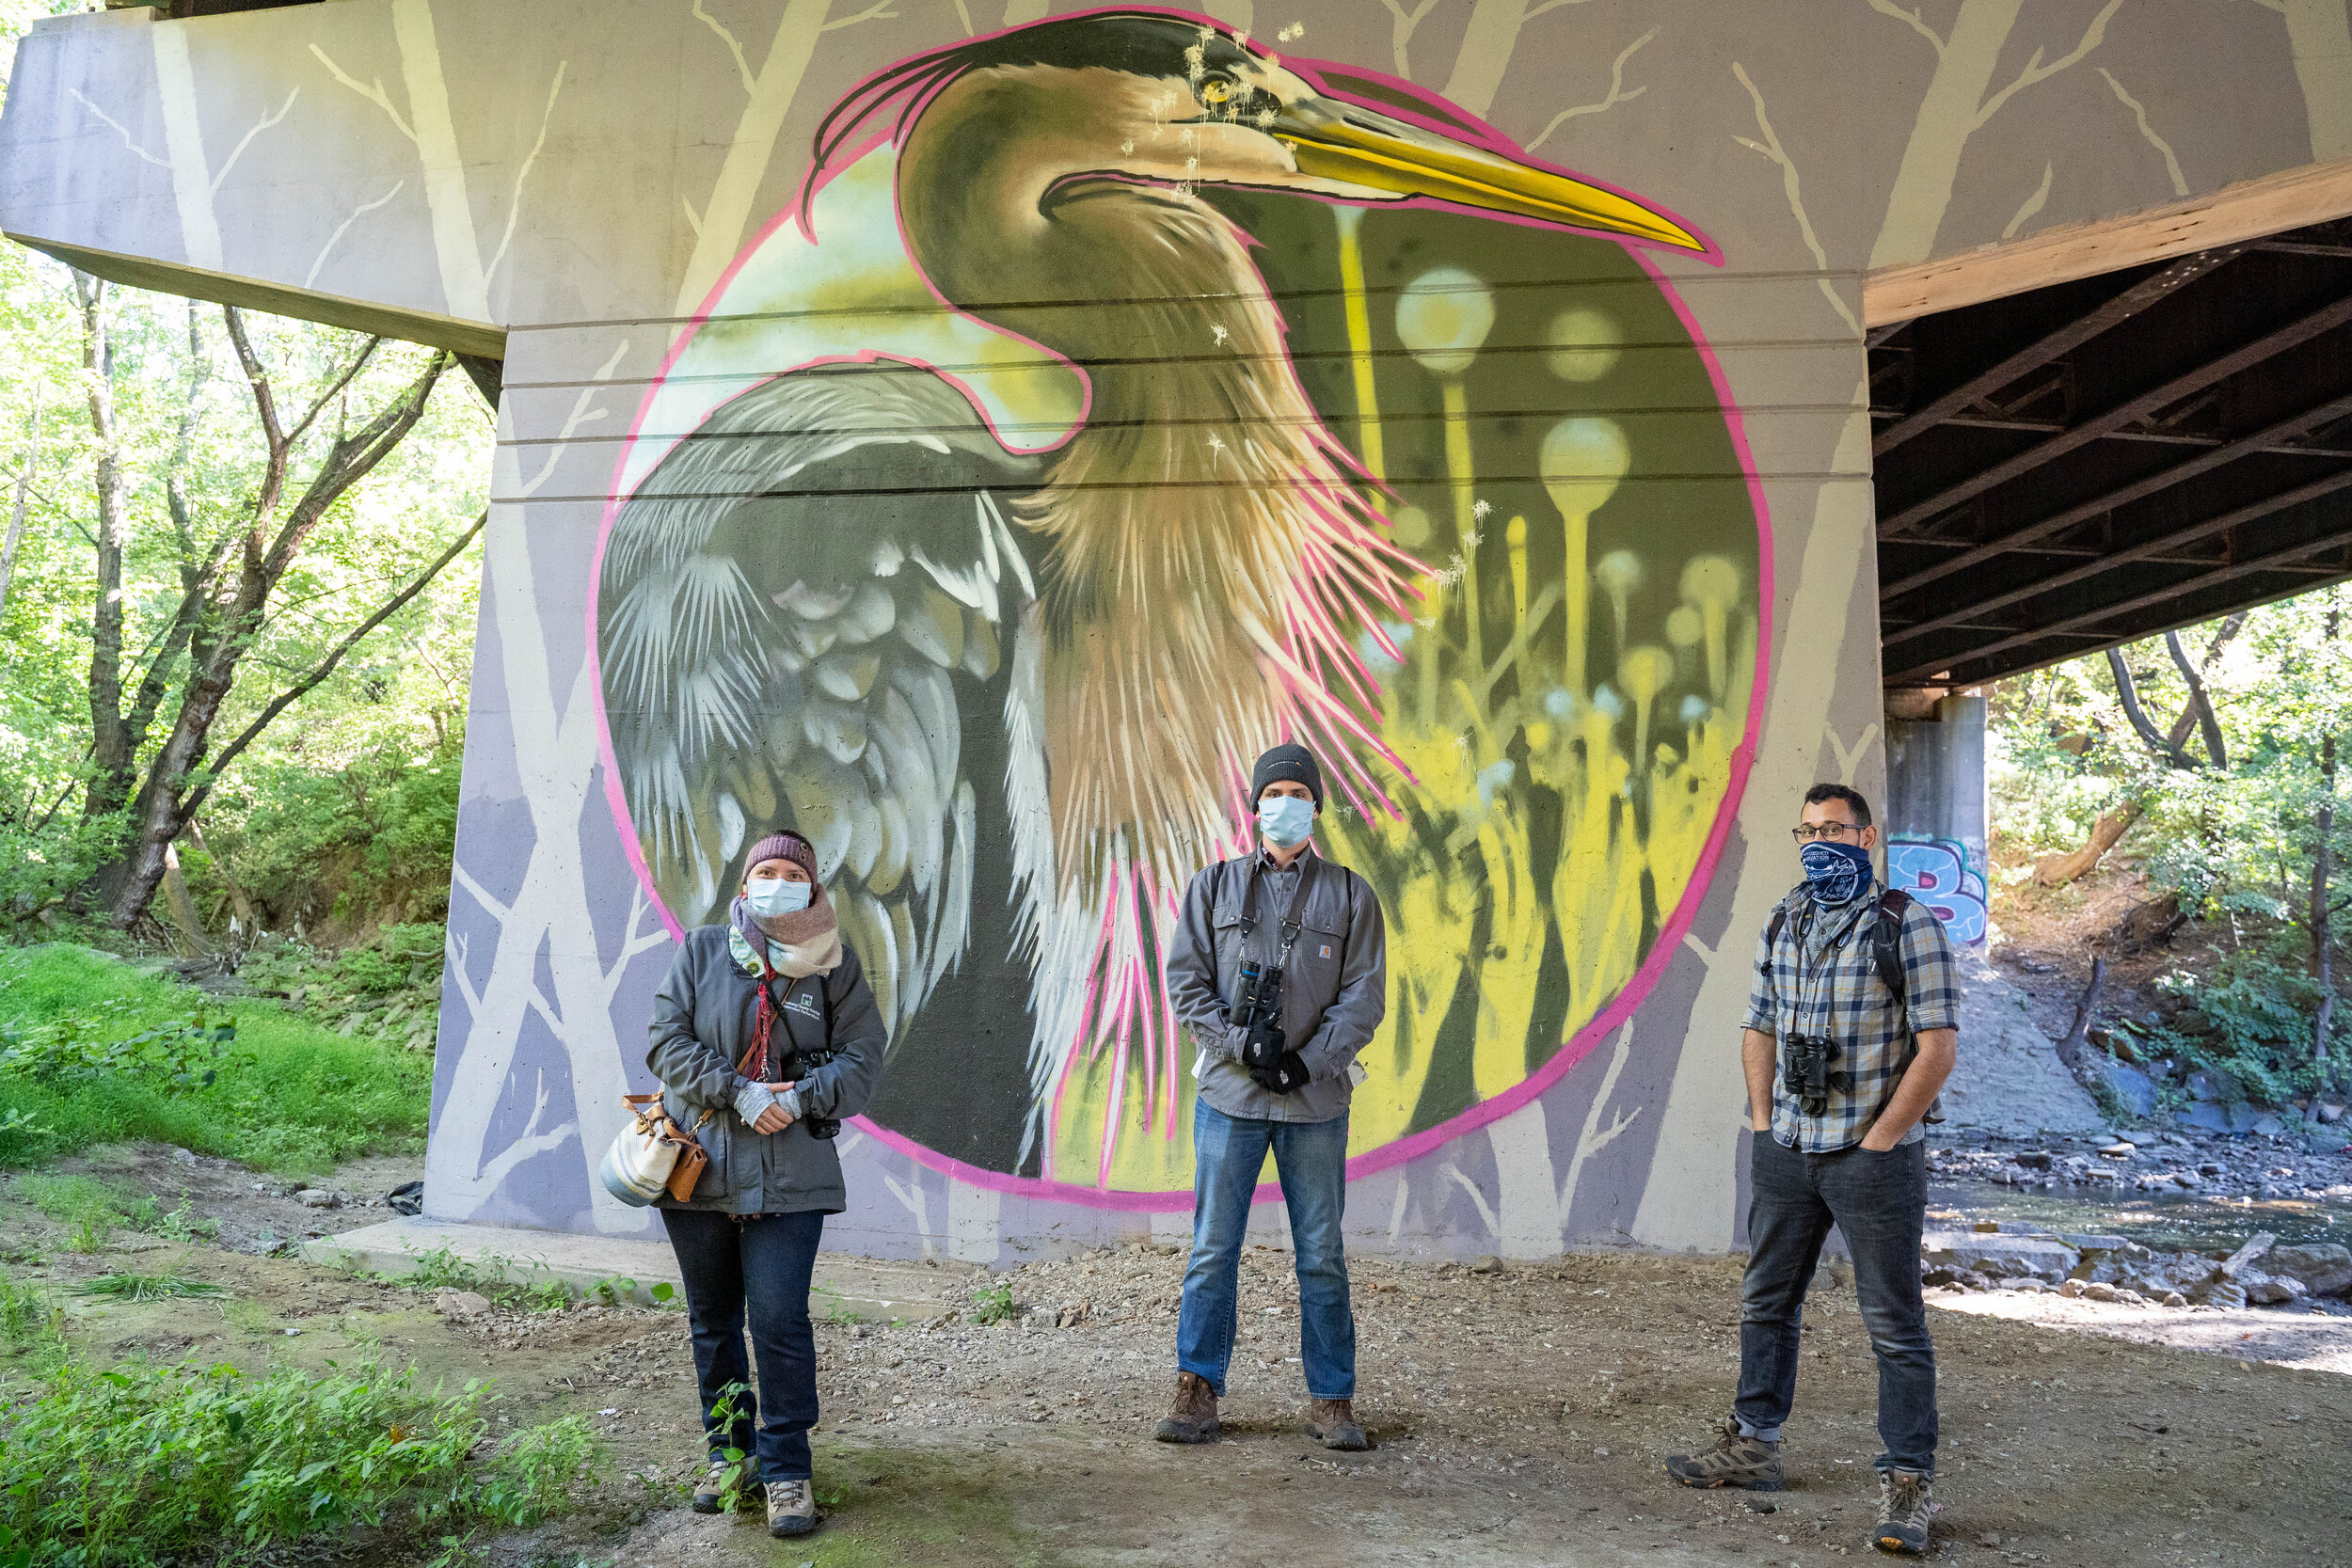 Visitors in front of one of the murals along the trail underneath the Whitaker Bridge. V.U.R.T Creative painted these murals of bird species common to the area.